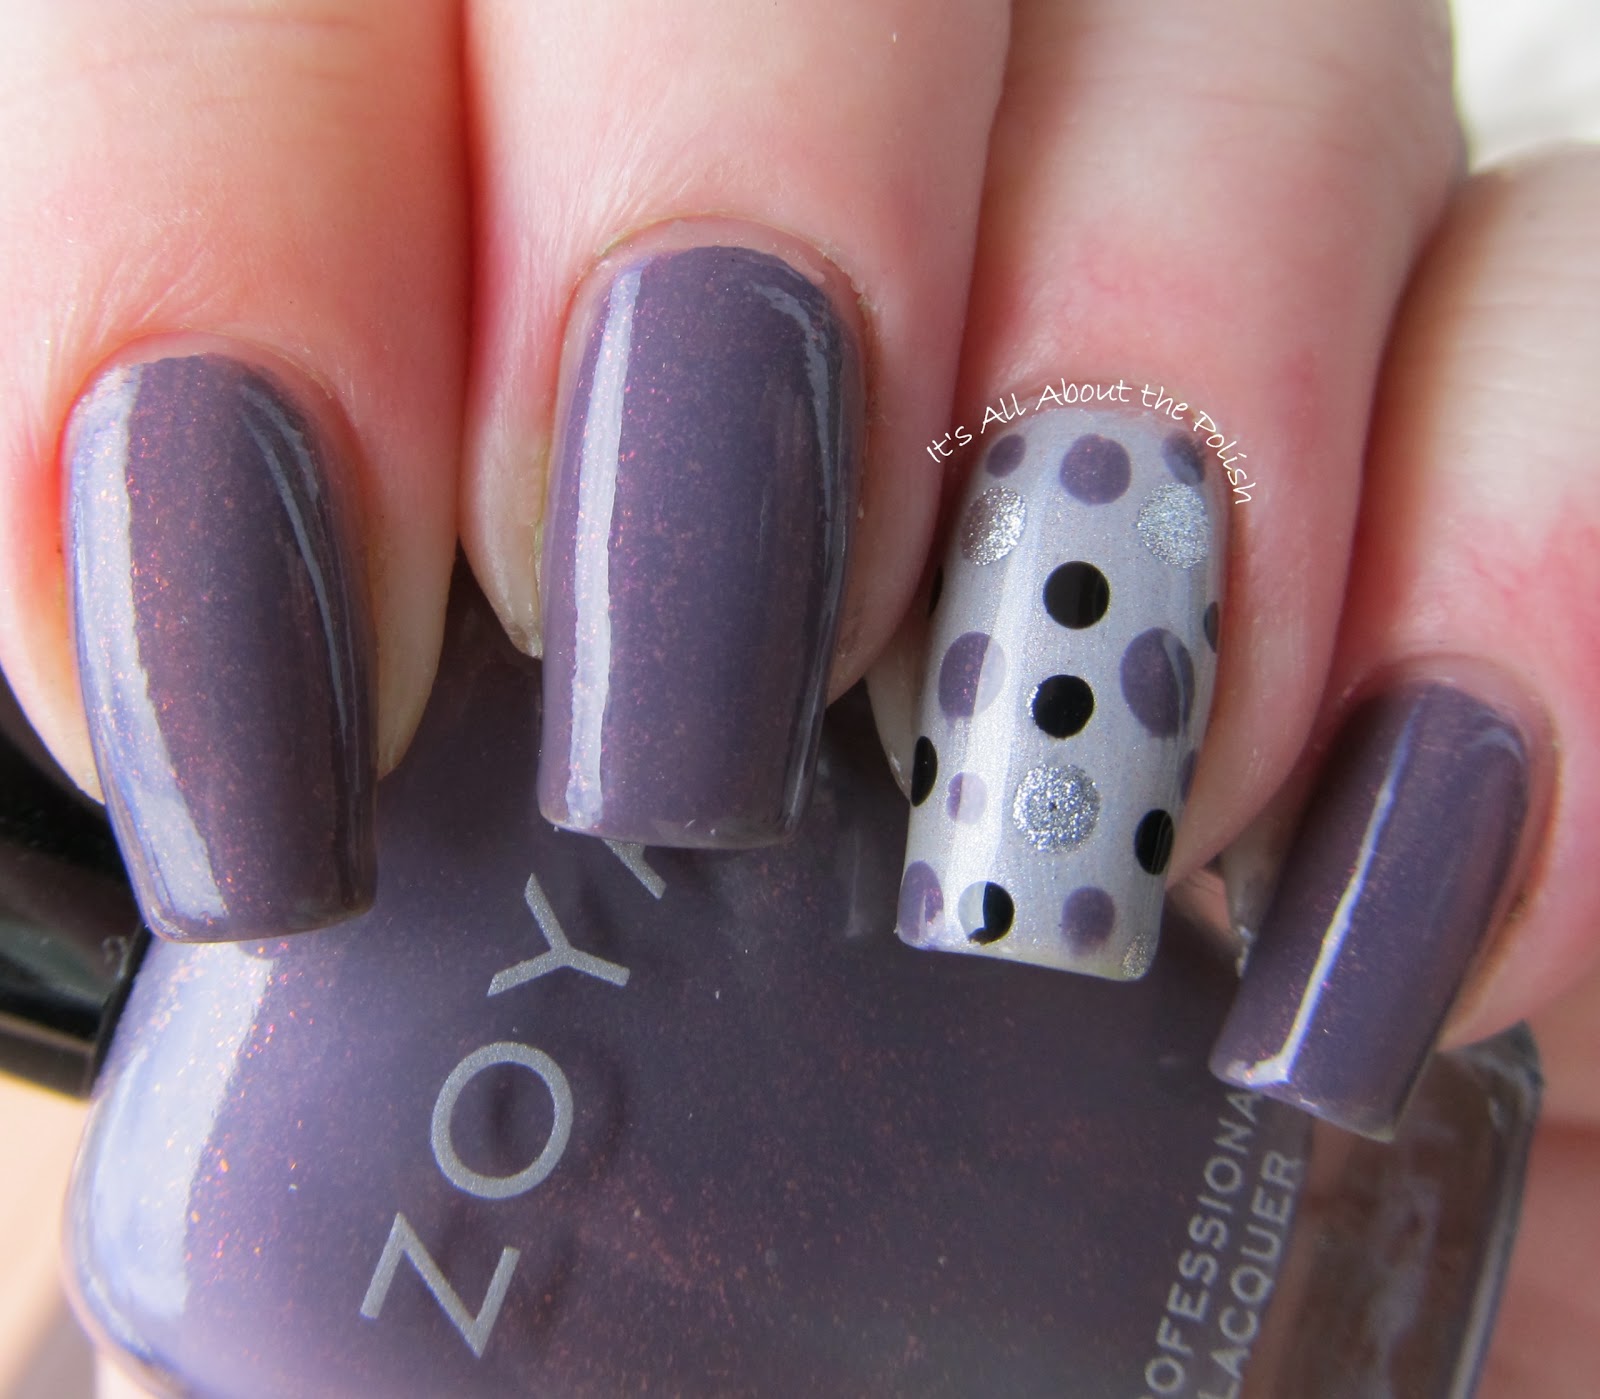 It's all about the polish: Zoya - Lotus